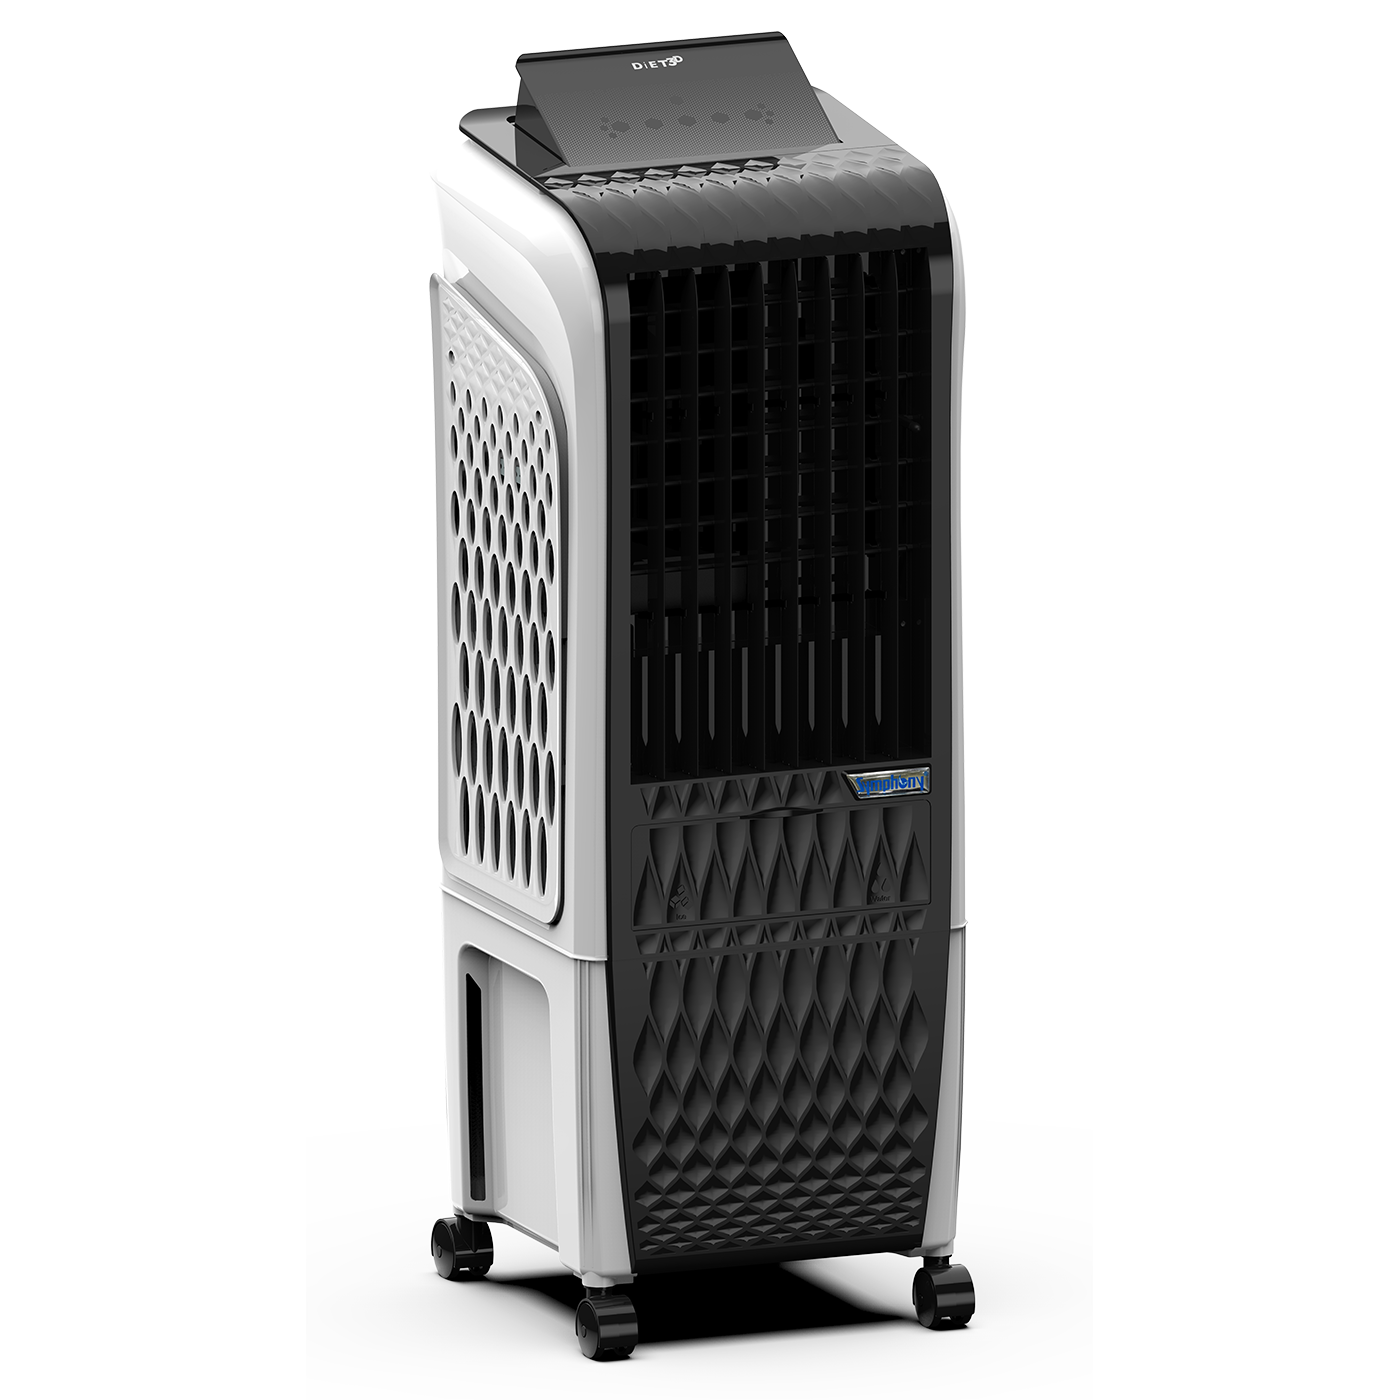 Portable Tower Personal Air Cooler Diet 3D 20i for Small Rooms